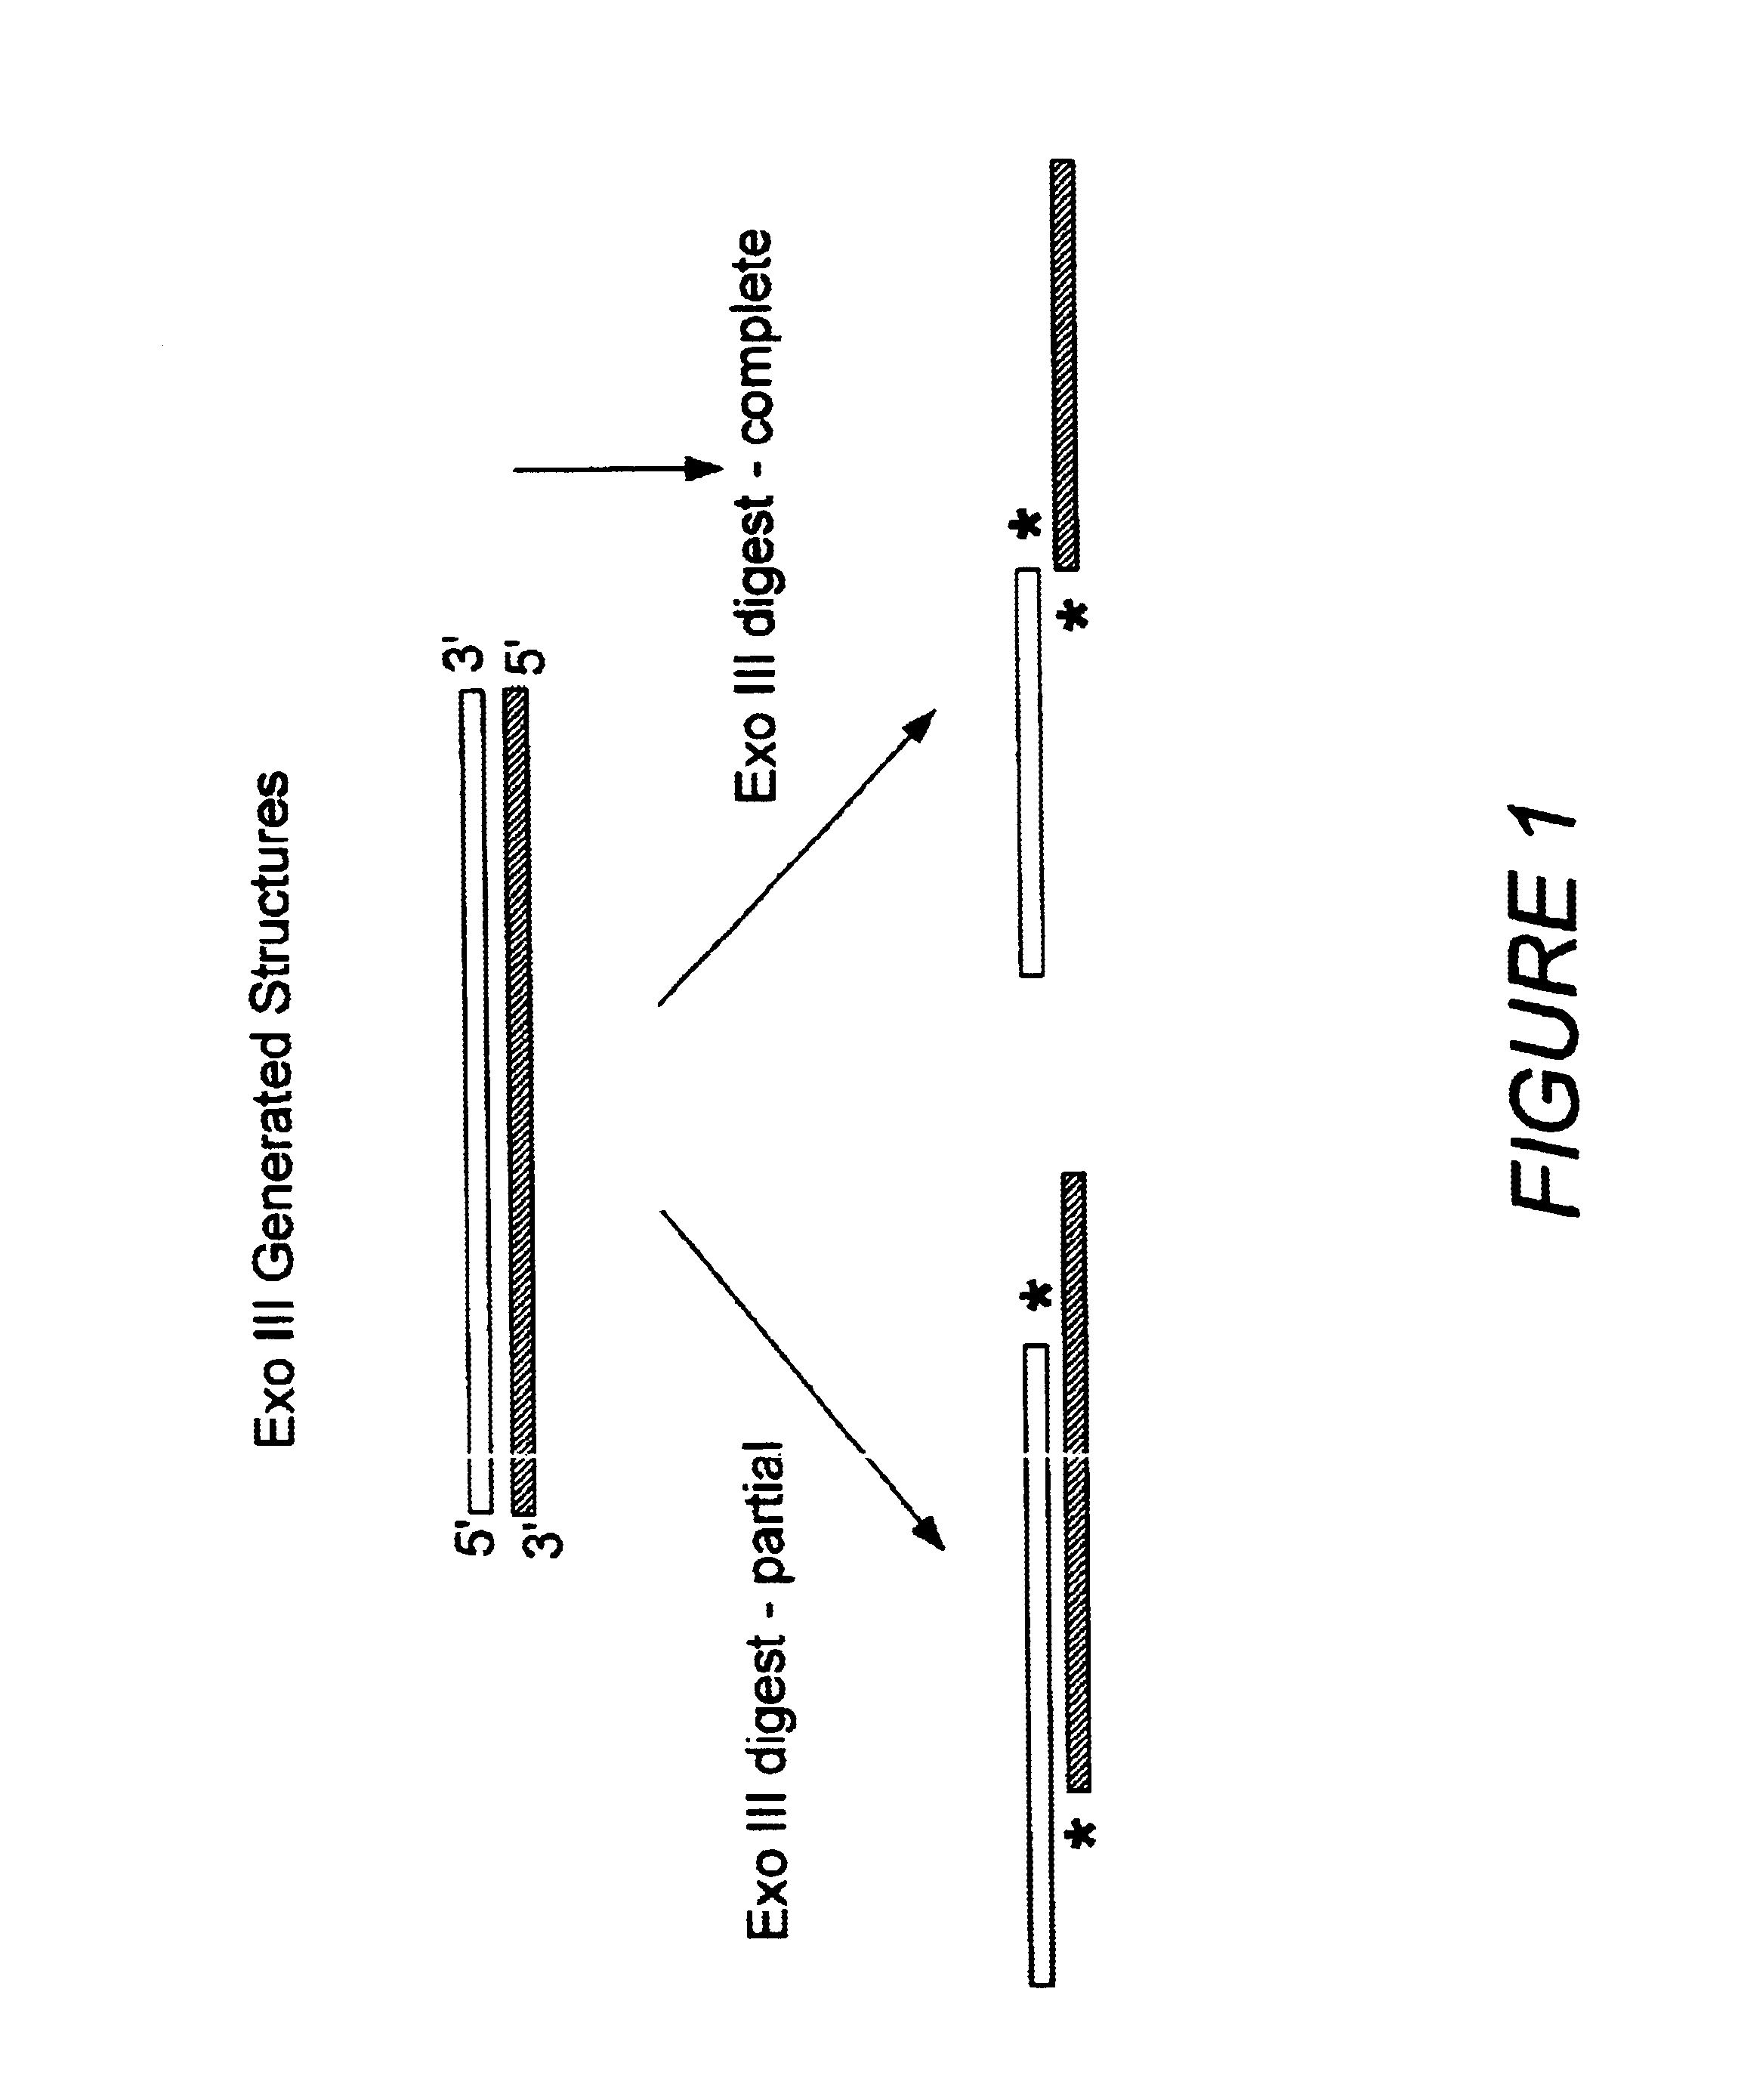 Non-stochastic generation of genetic vaccines and enzymes